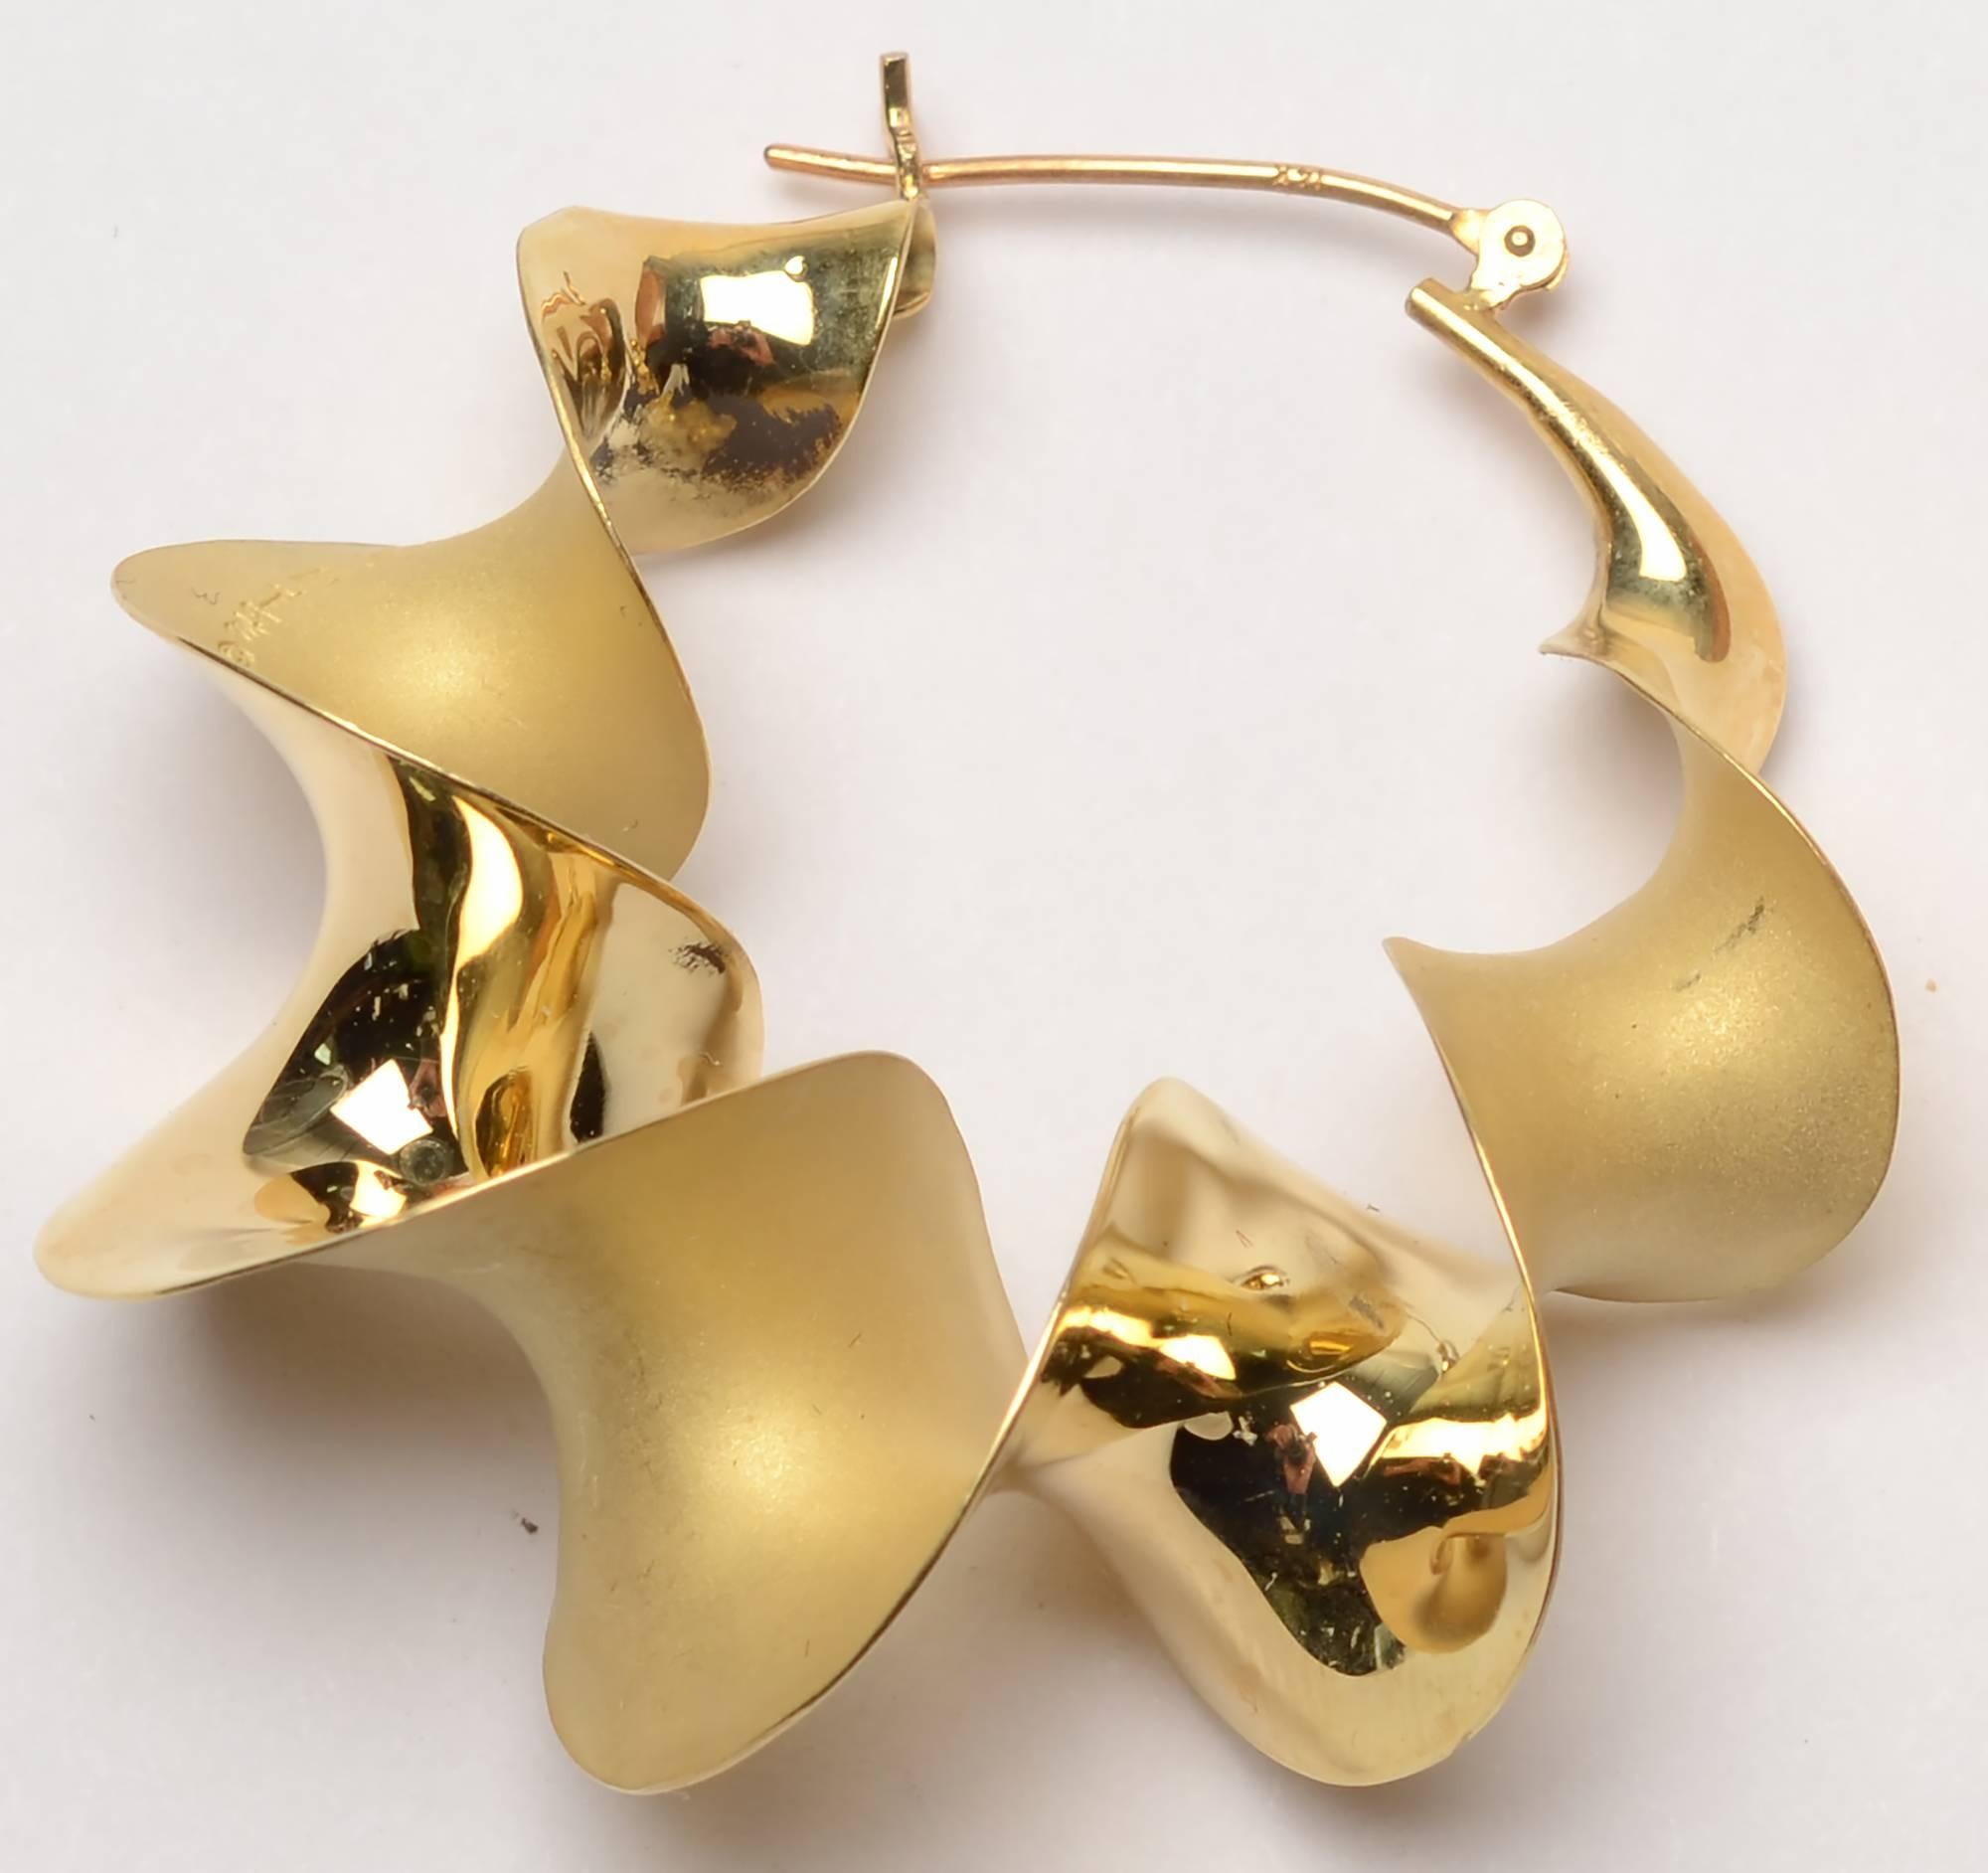 Michael Good is known for his very sculptural jewelry and his ability to twist the metal to create new surfaces. In addition to creating new surfaces in these unusual hoop earrings, Good also created two different finishes. The earrings are both